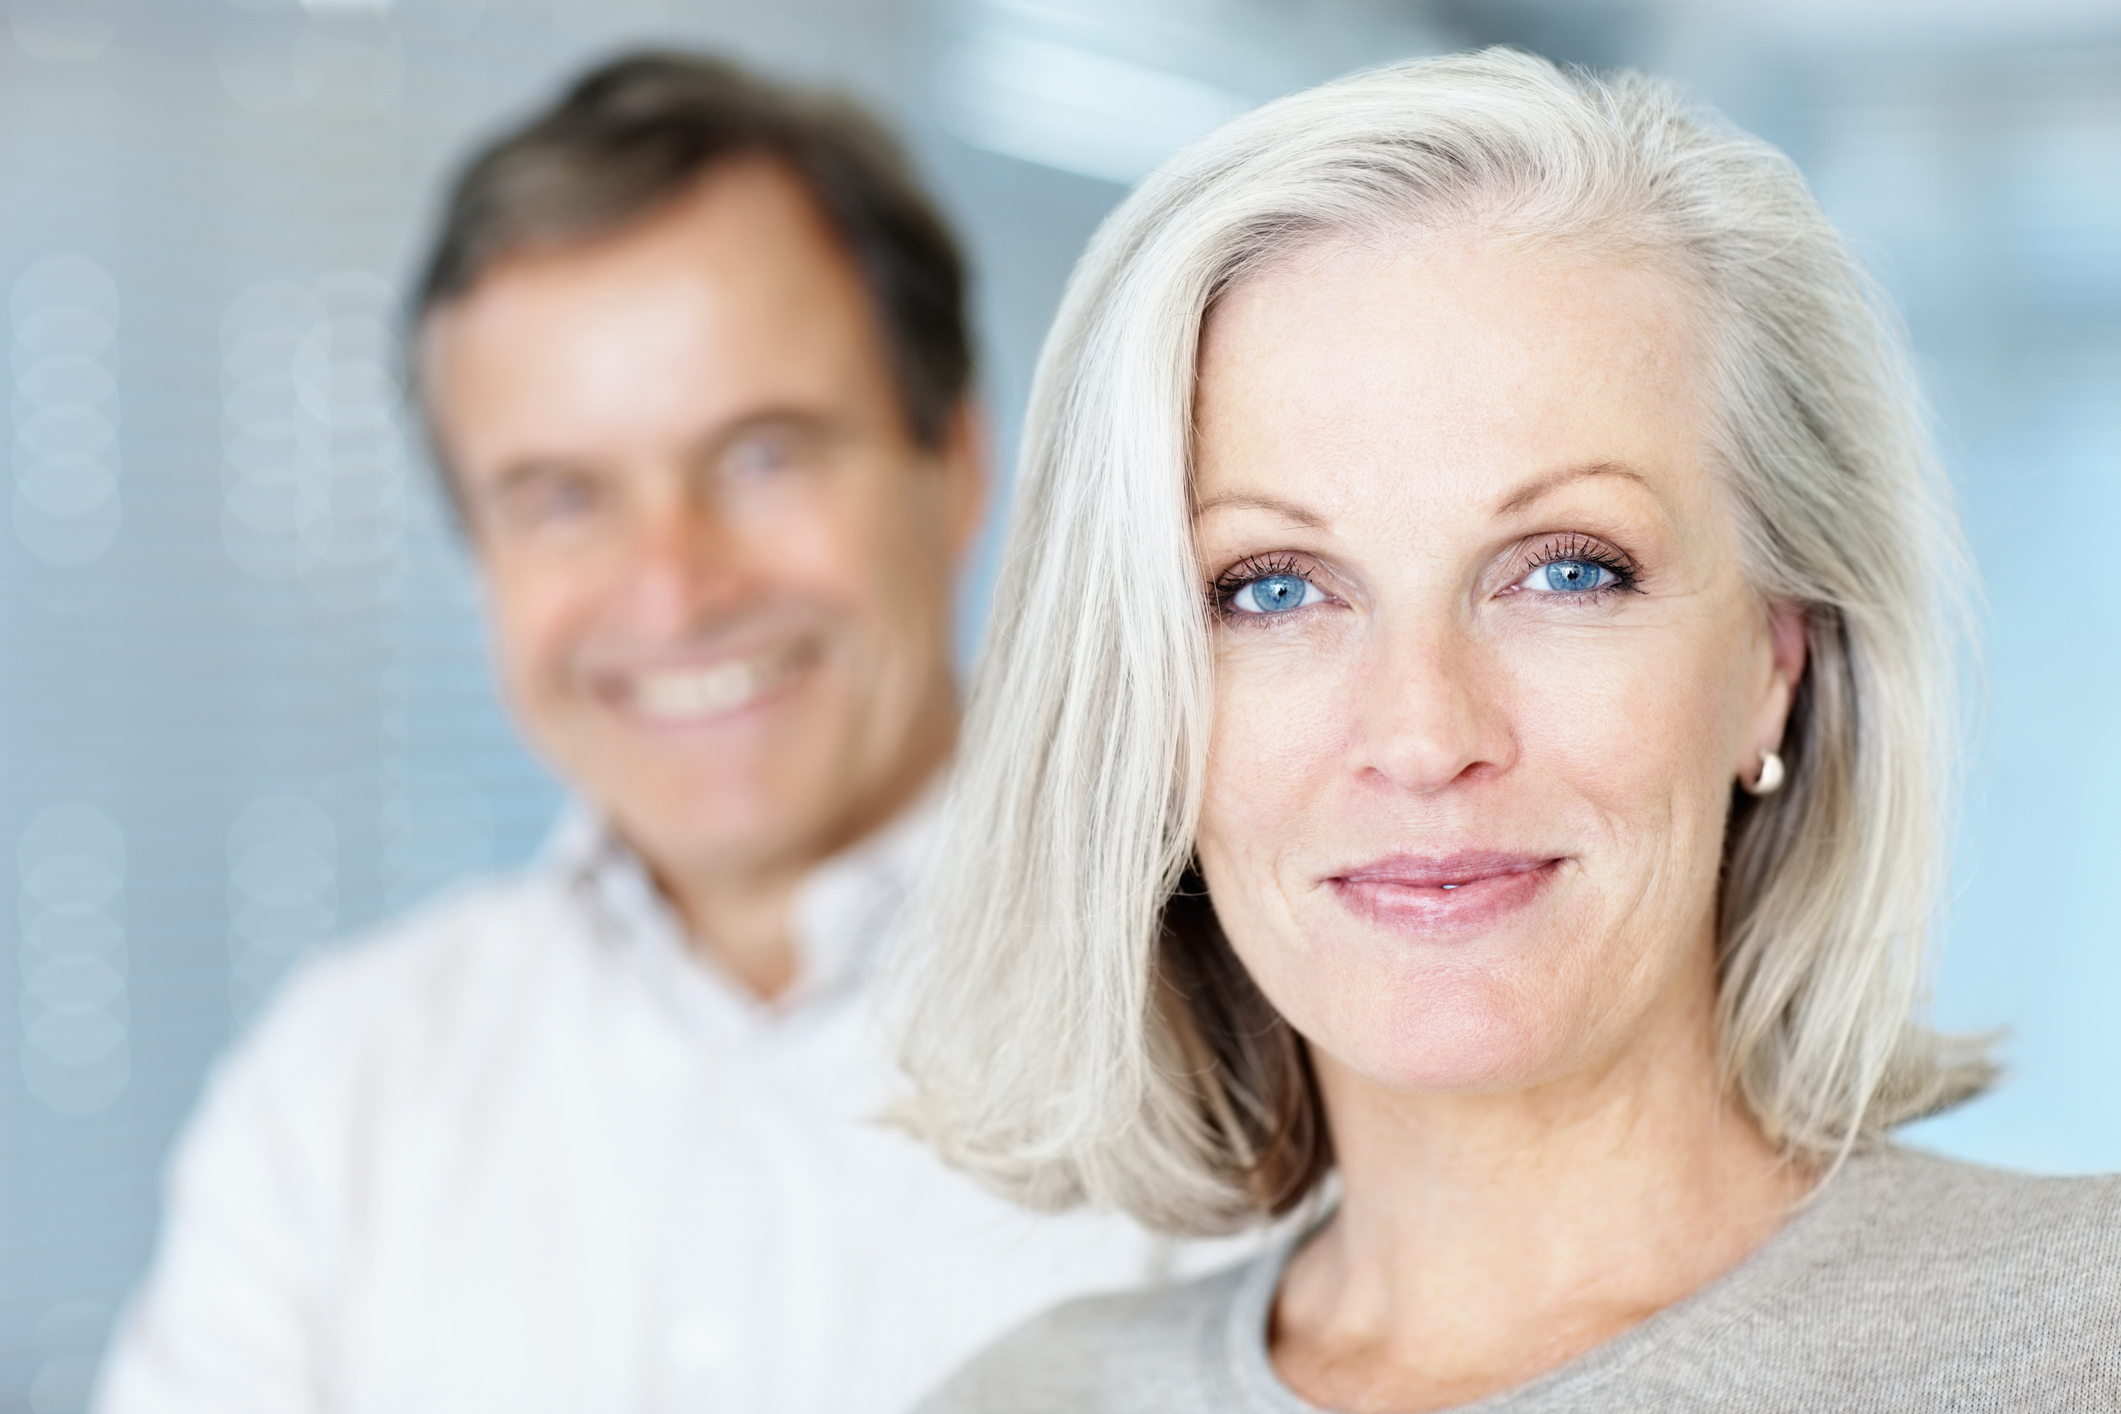 Mature woman smiling with man in the background